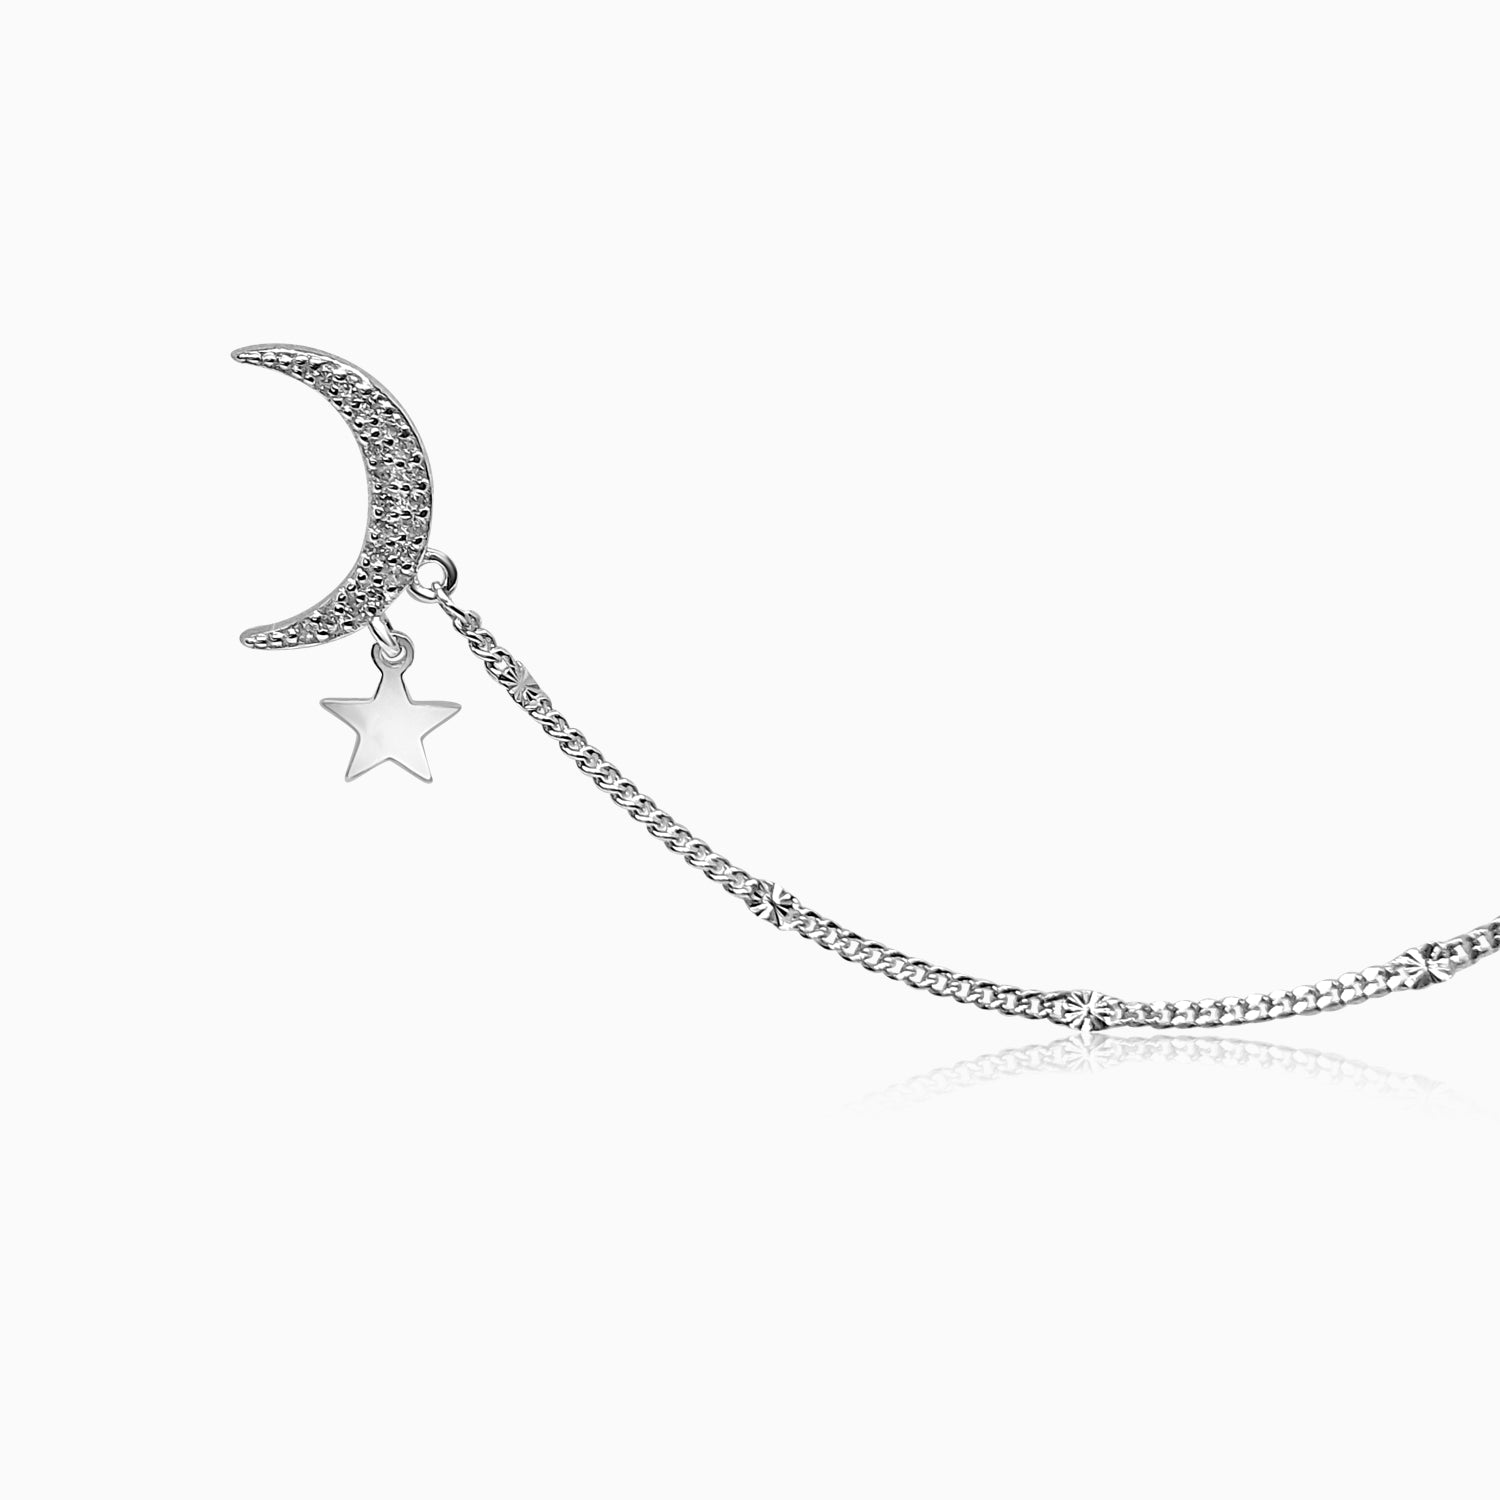 Silver Sparkling Moon Star Earrings with Chain Clip On